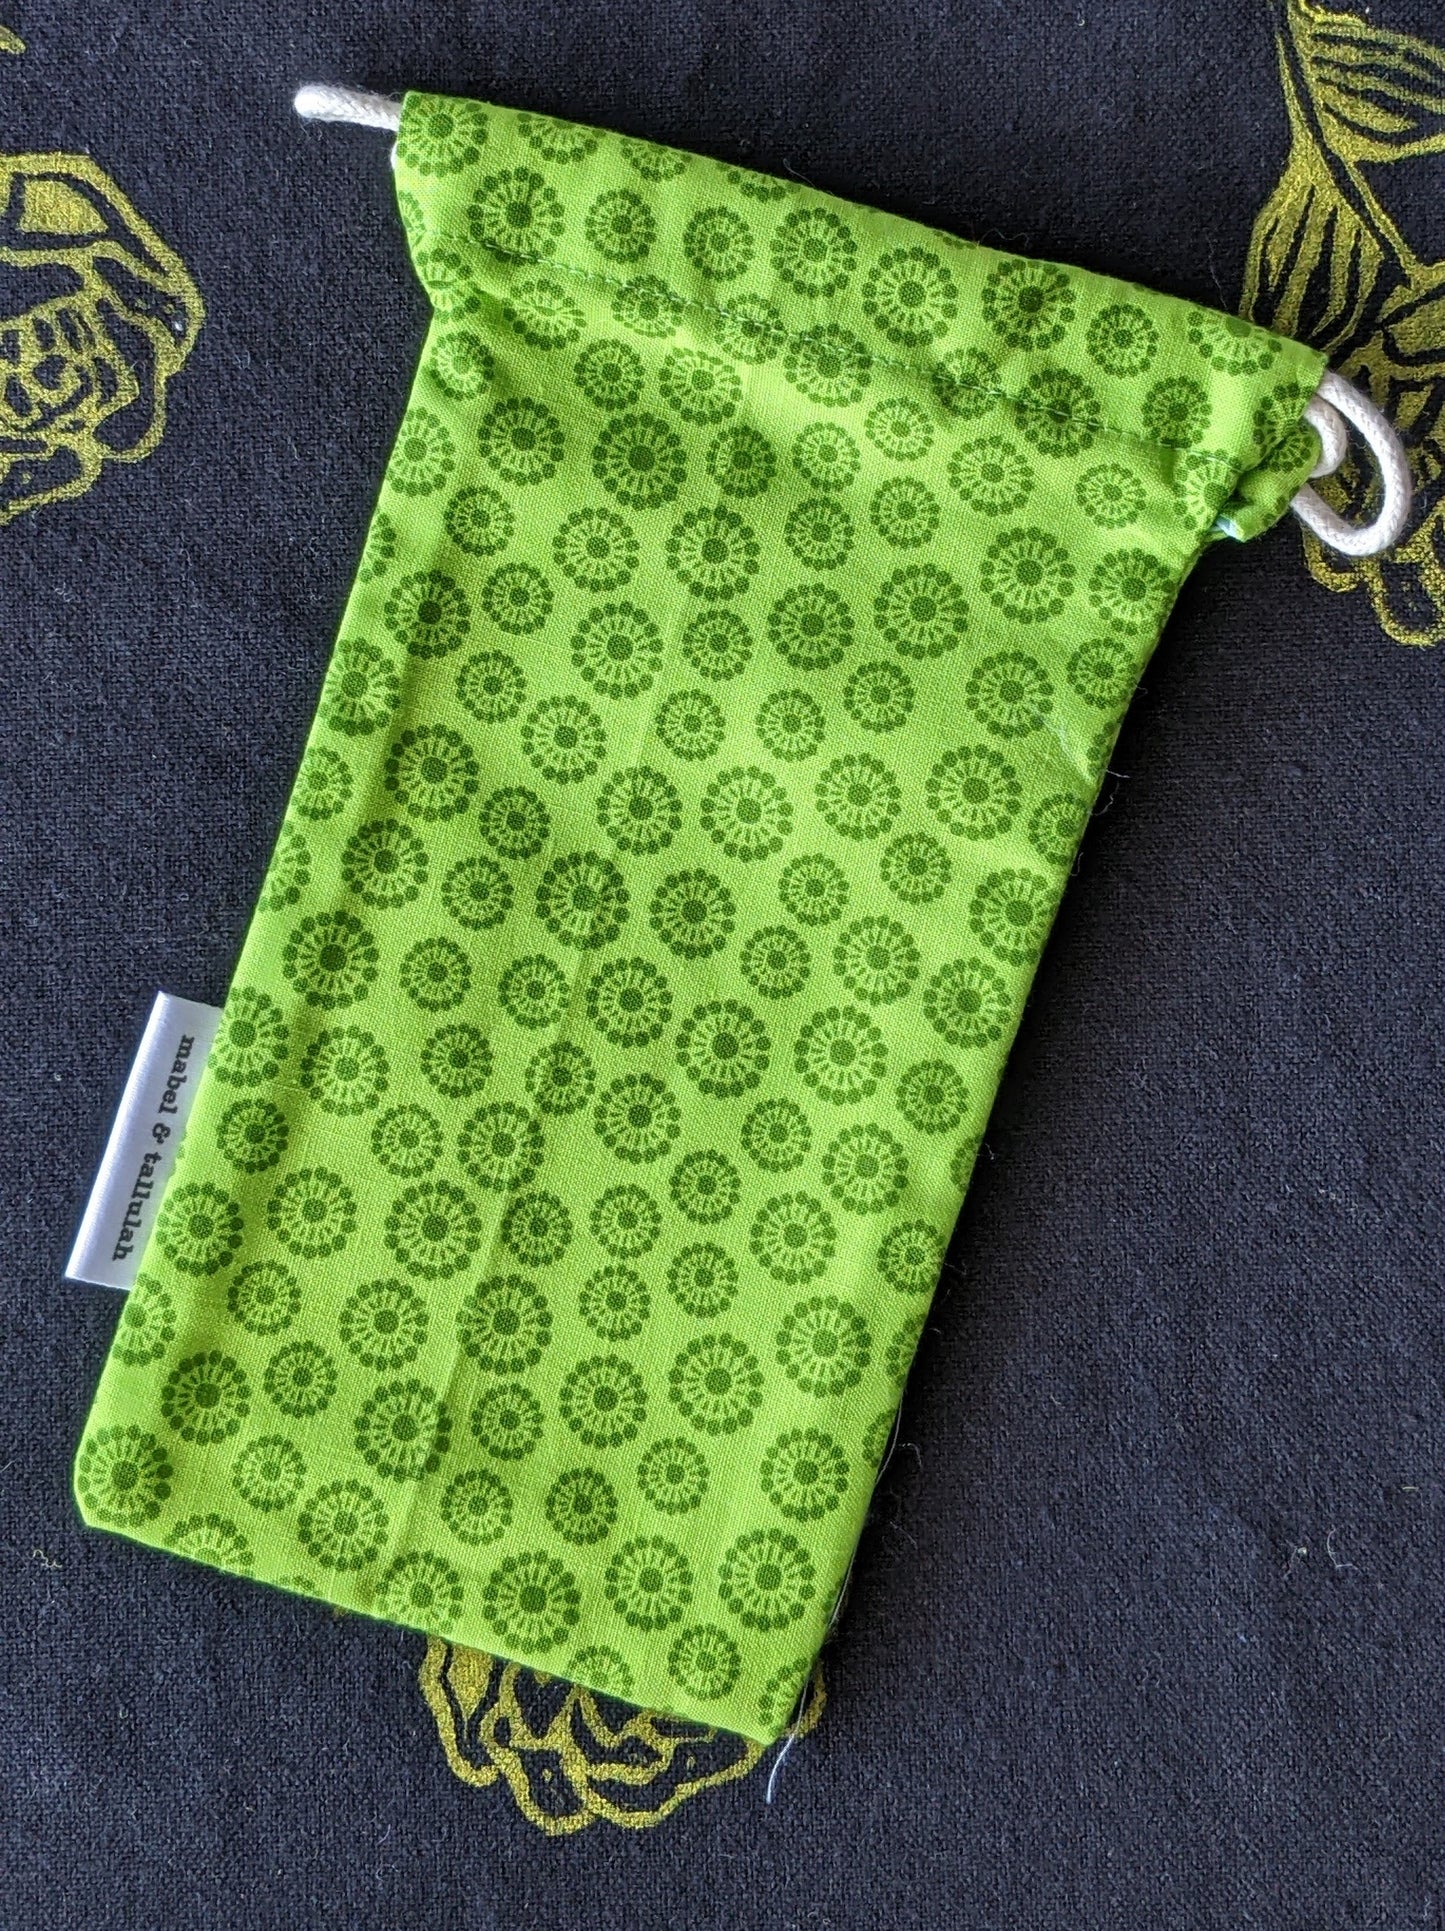 Green wheel pattern  sunglasses cover mini pouch by The Arthly Box